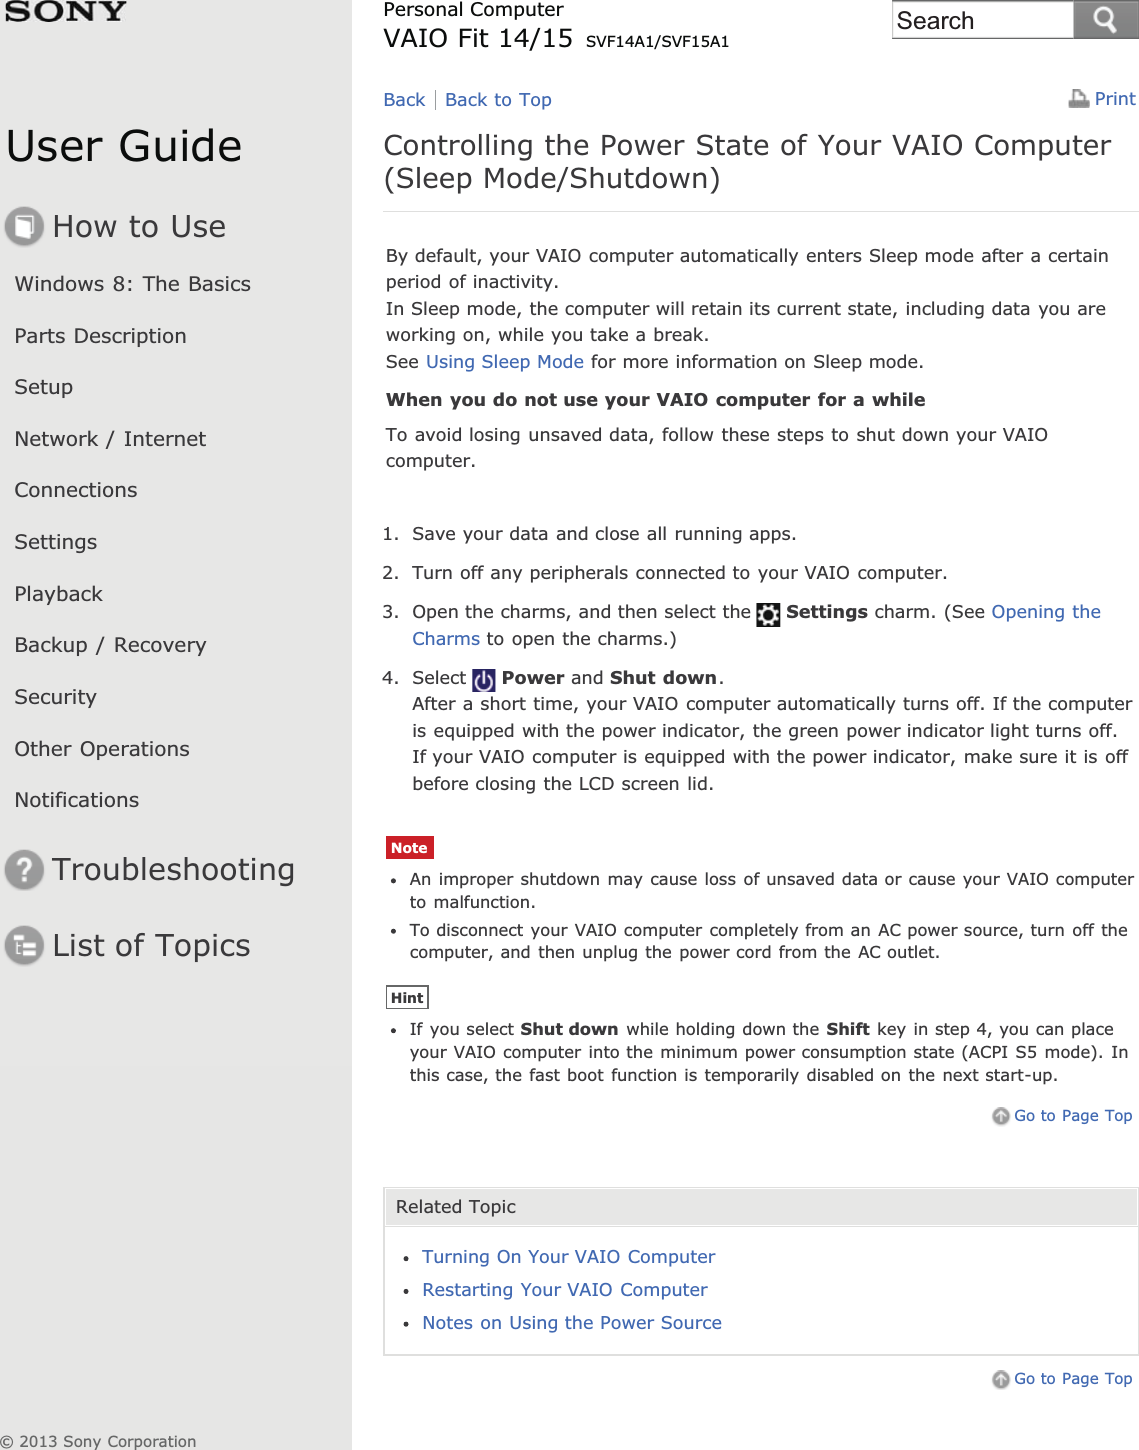 User GuideHow to UseWindows 8: The BasicsParts DescriptionSetupNetwork / InternetConnectionsSettingsPlaybackBackup / RecoverySecurityOther OperationsNotificationsTroubleshootingList of TopicsPrintPersonal ComputerVAIO Fit 14/15 SVF14A1/SVF15A1Controlling the Power State of Your VAIO Computer(Sleep Mode/Shutdown)By default, your VAIO computer automatically enters Sleep mode after a certainperiod of inactivity.In Sleep mode, the computer will retain its current state, including data you areworking on, while you take a break.See Using Sleep Mode for more information on Sleep mode.When you do not use your VAIO computer for a whileTo avoid losing unsaved data, follow these steps to shut down your VAIOcomputer.1. Save your data and close all running apps.2. Turn off any peripherals connected to your VAIO computer.3. Open the charms, and then select the Settings charm. (See Opening theCharms to open the charms.)4. Select Power and Shut down.After a short time, your VAIO computer automatically turns off. If the computeris equipped with the power indicator, the green power indicator light turns off.If your VAIO computer is equipped with the power indicator, make sure it is offbefore closing the LCD screen lid.NoteAn improper shutdown may cause loss of unsaved data or cause your VAIO computerto malfunction.To disconnect your VAIO computer completely from an AC power source, turn off thecomputer, and then unplug the power cord from the AC outlet.HintIf you select Shut down while holding down the Shift key in step 4, you can placeyour VAIO computer into the minimum power consumption state (ACPI S5 mode). Inthis case, the fast boot function is temporarily disabled on the next start-up.Go to Page TopRelated TopicTurning On Your VAIO ComputerRestarting Your VAIO ComputerNotes on Using the Power SourceGo to Page TopBack Back to Top© 2013 Sony CorporationSearch